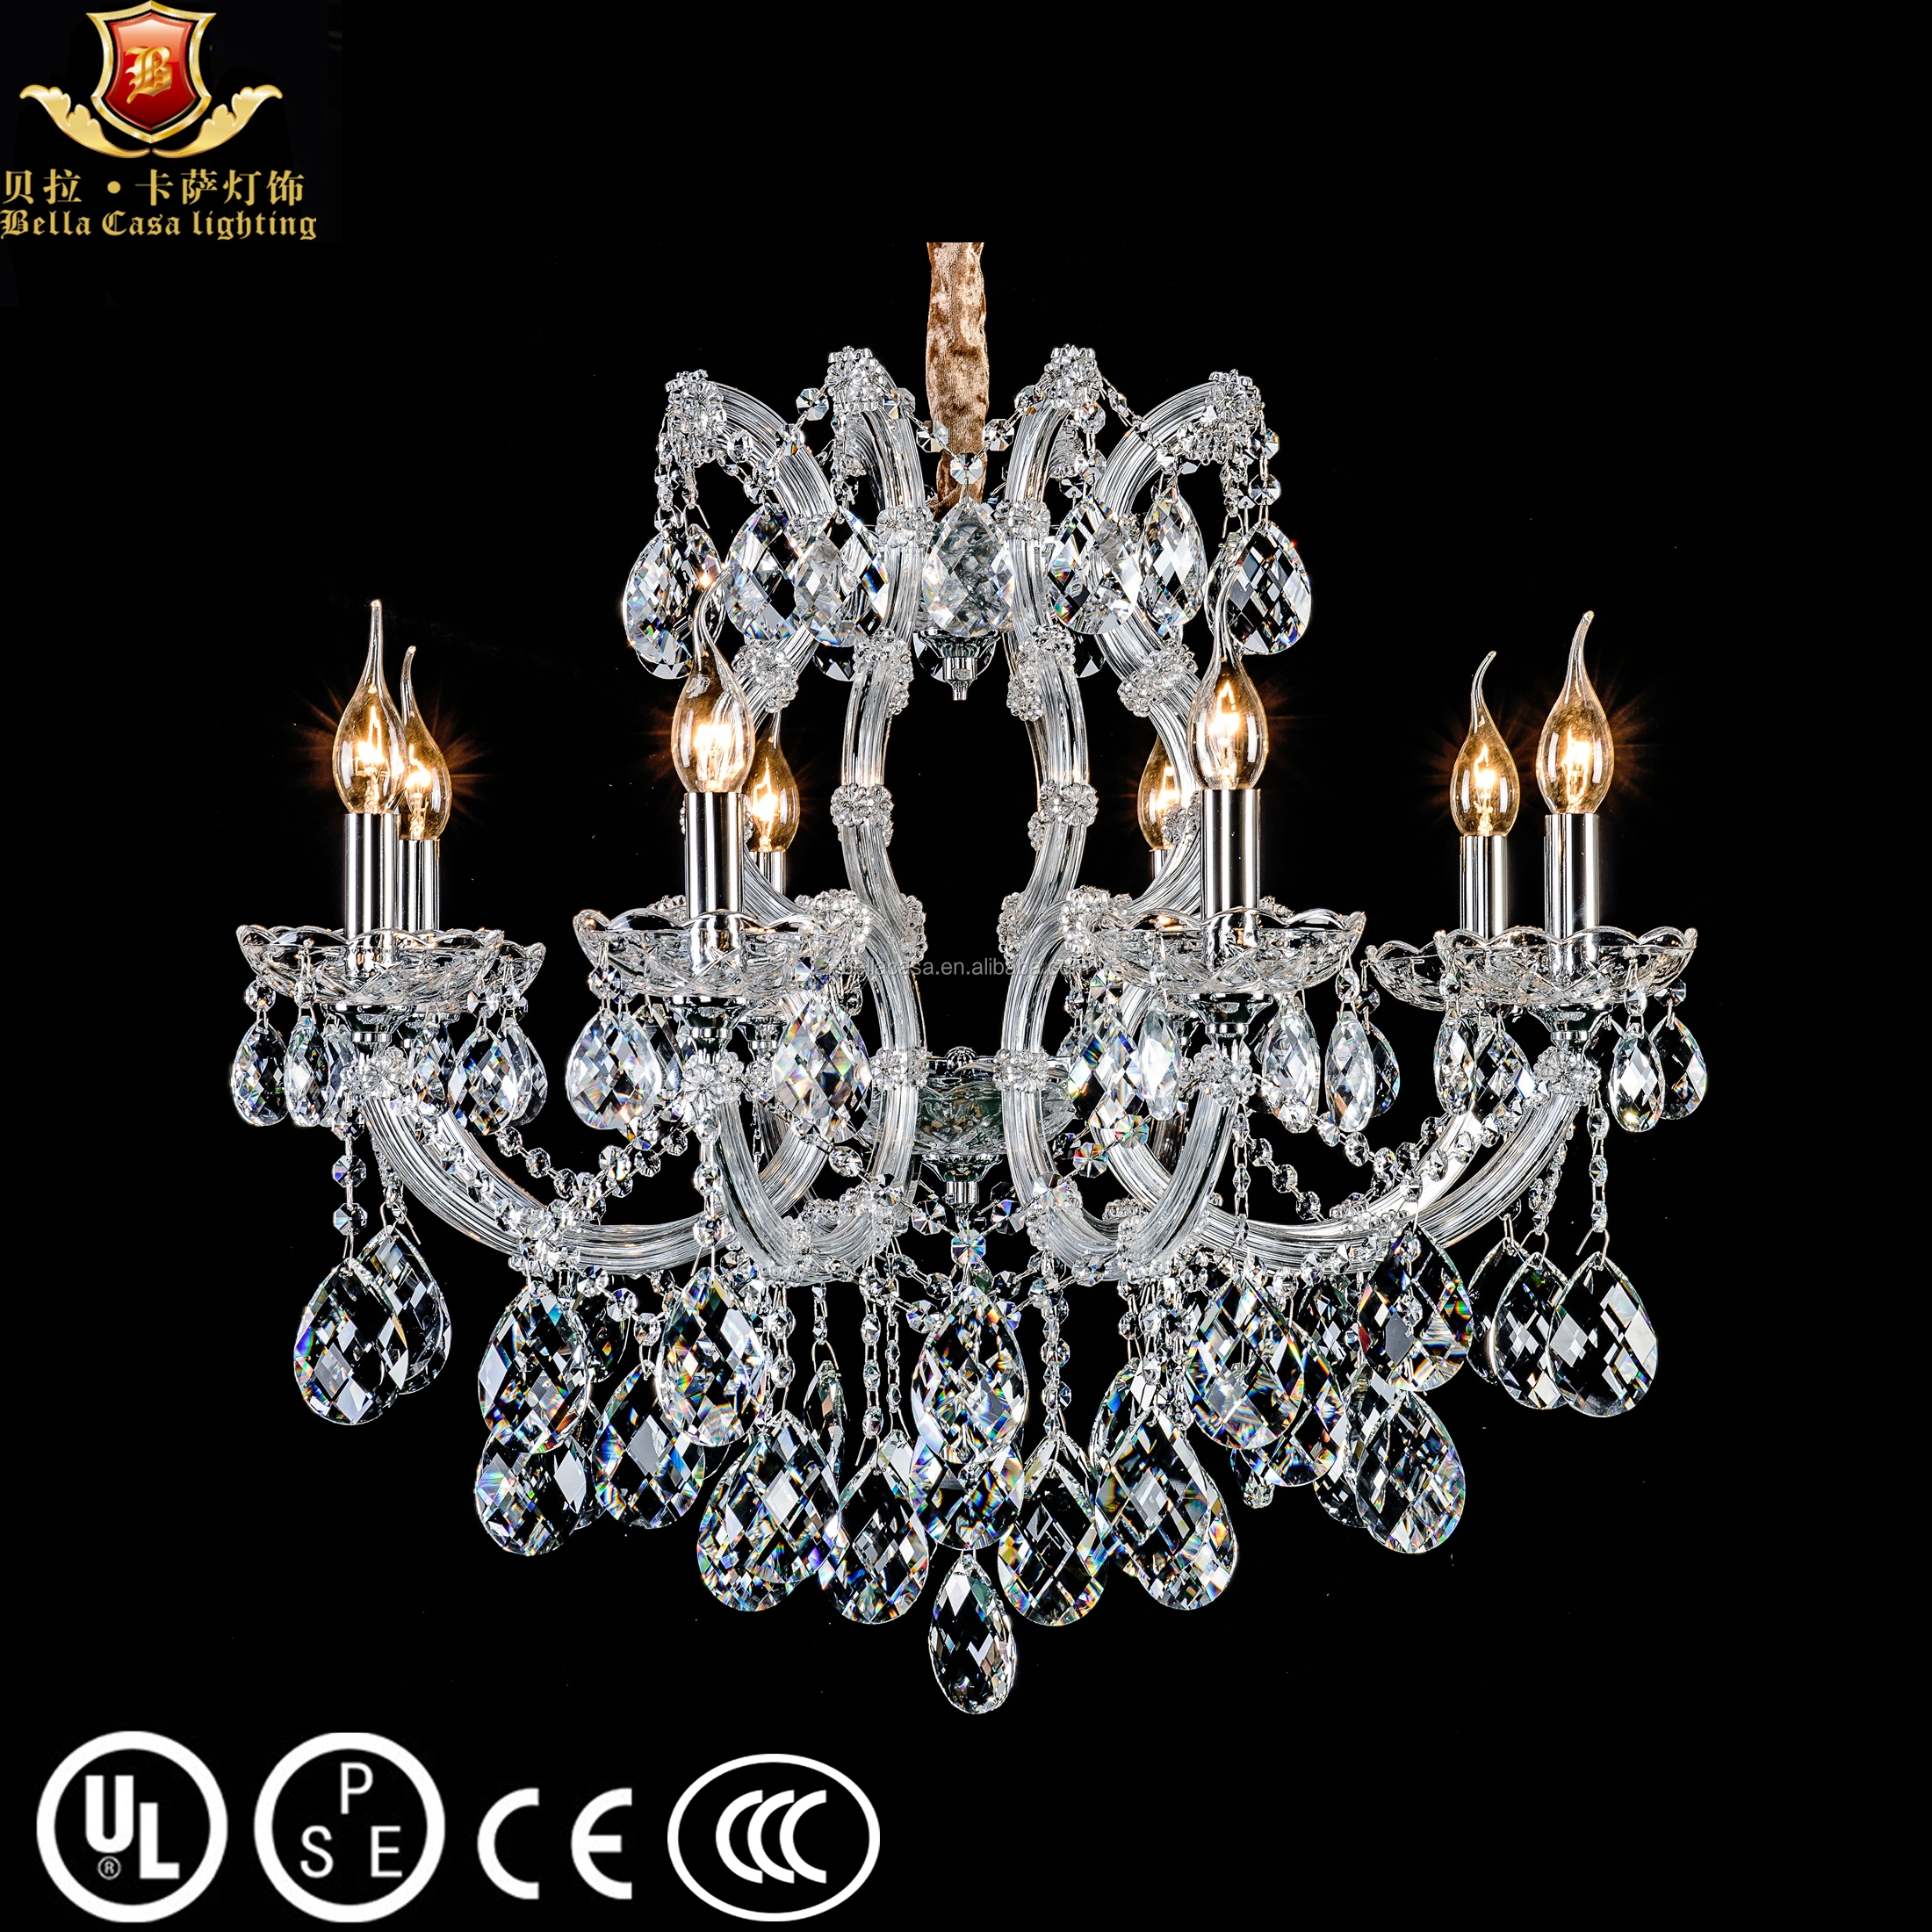 New Model 8 Lights Hotel Decorative Chain Hanging Crystal Chandeliers